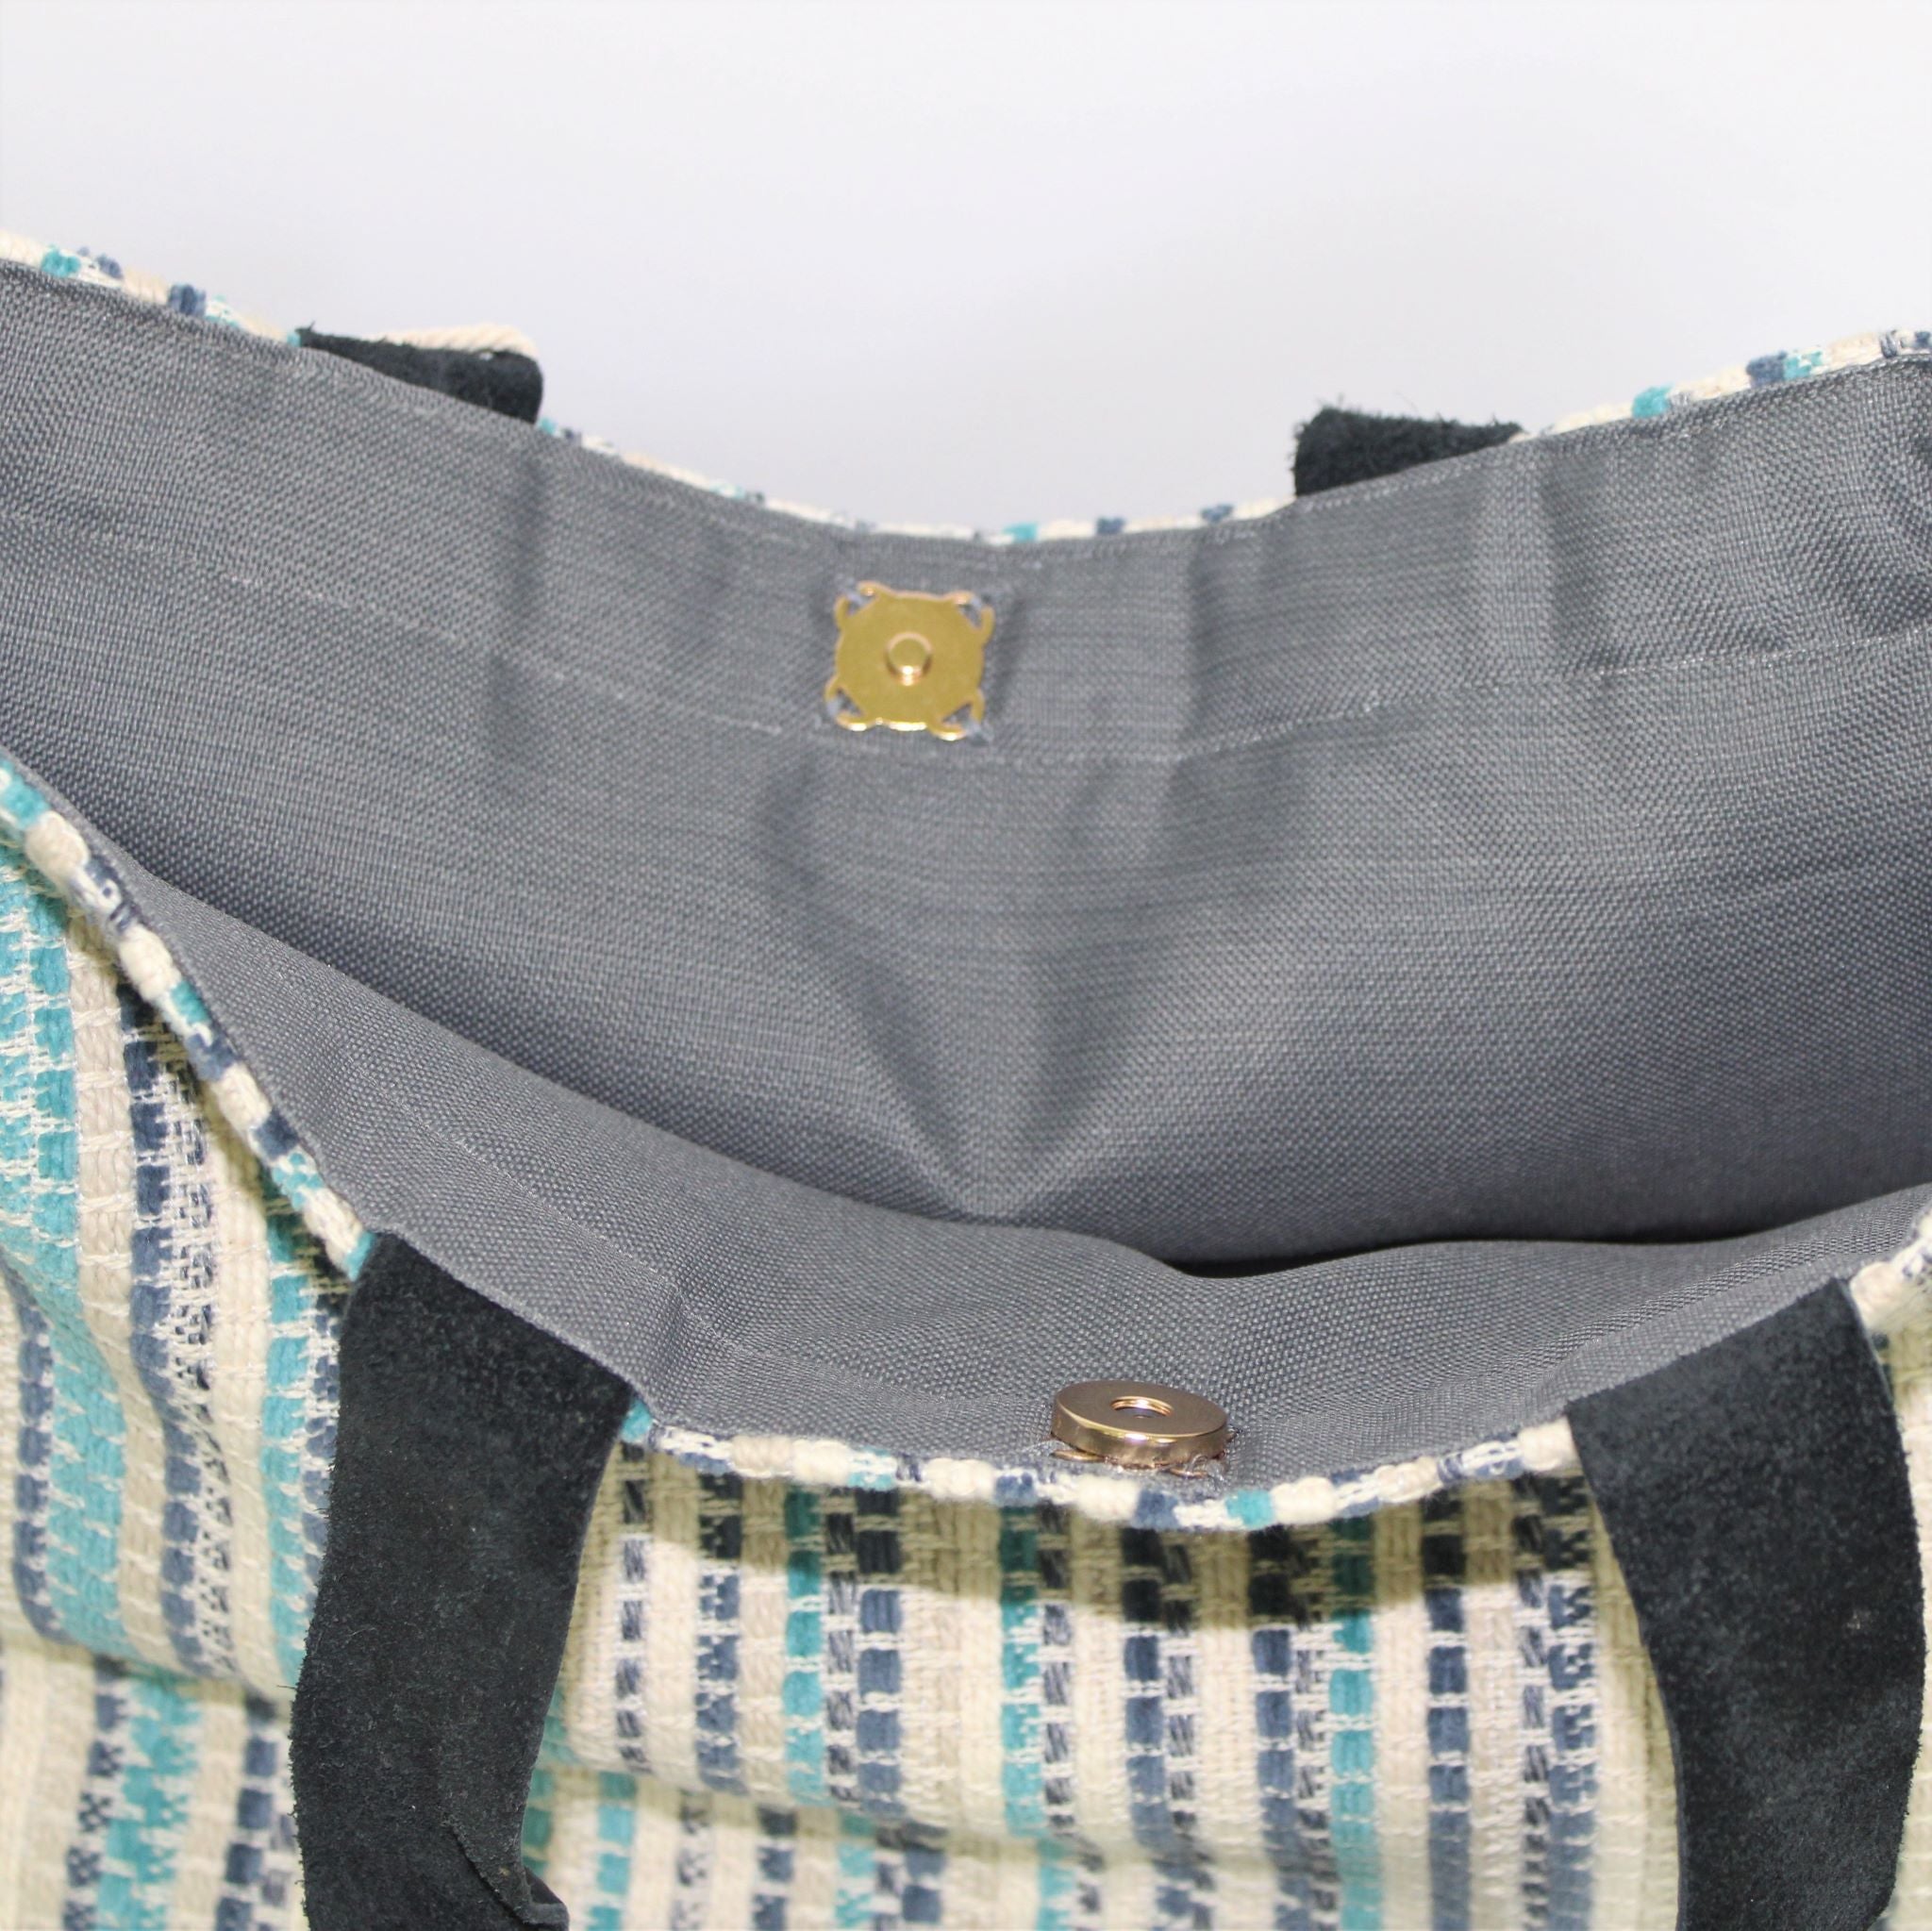 Upholstery Tote -Teal stripes